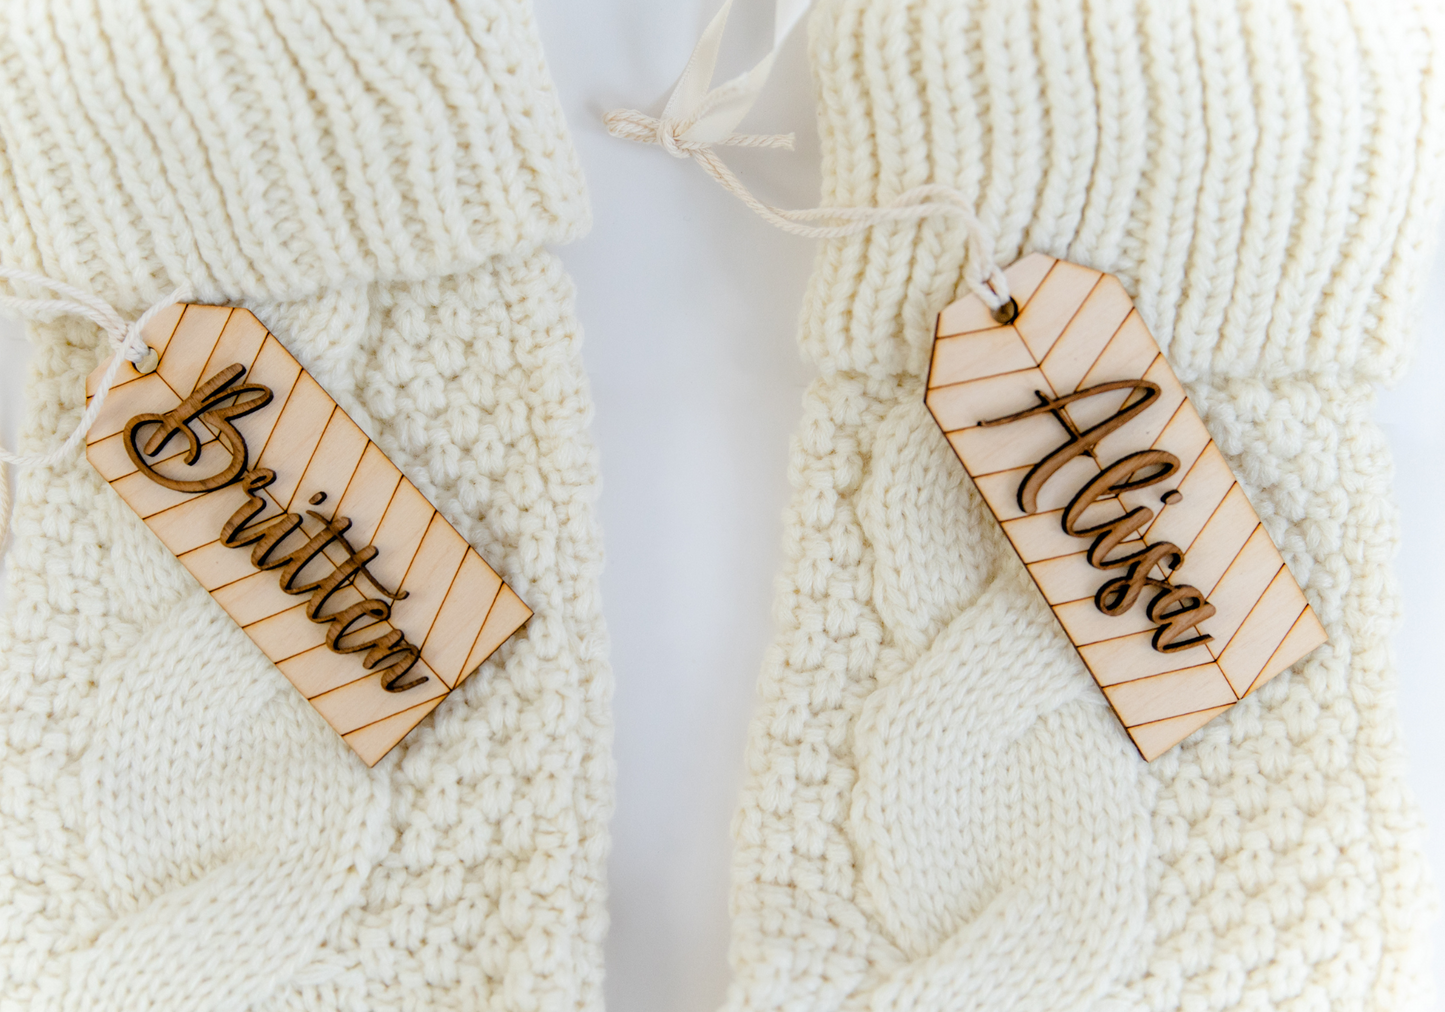 Personalized Wooden Stocking Tag